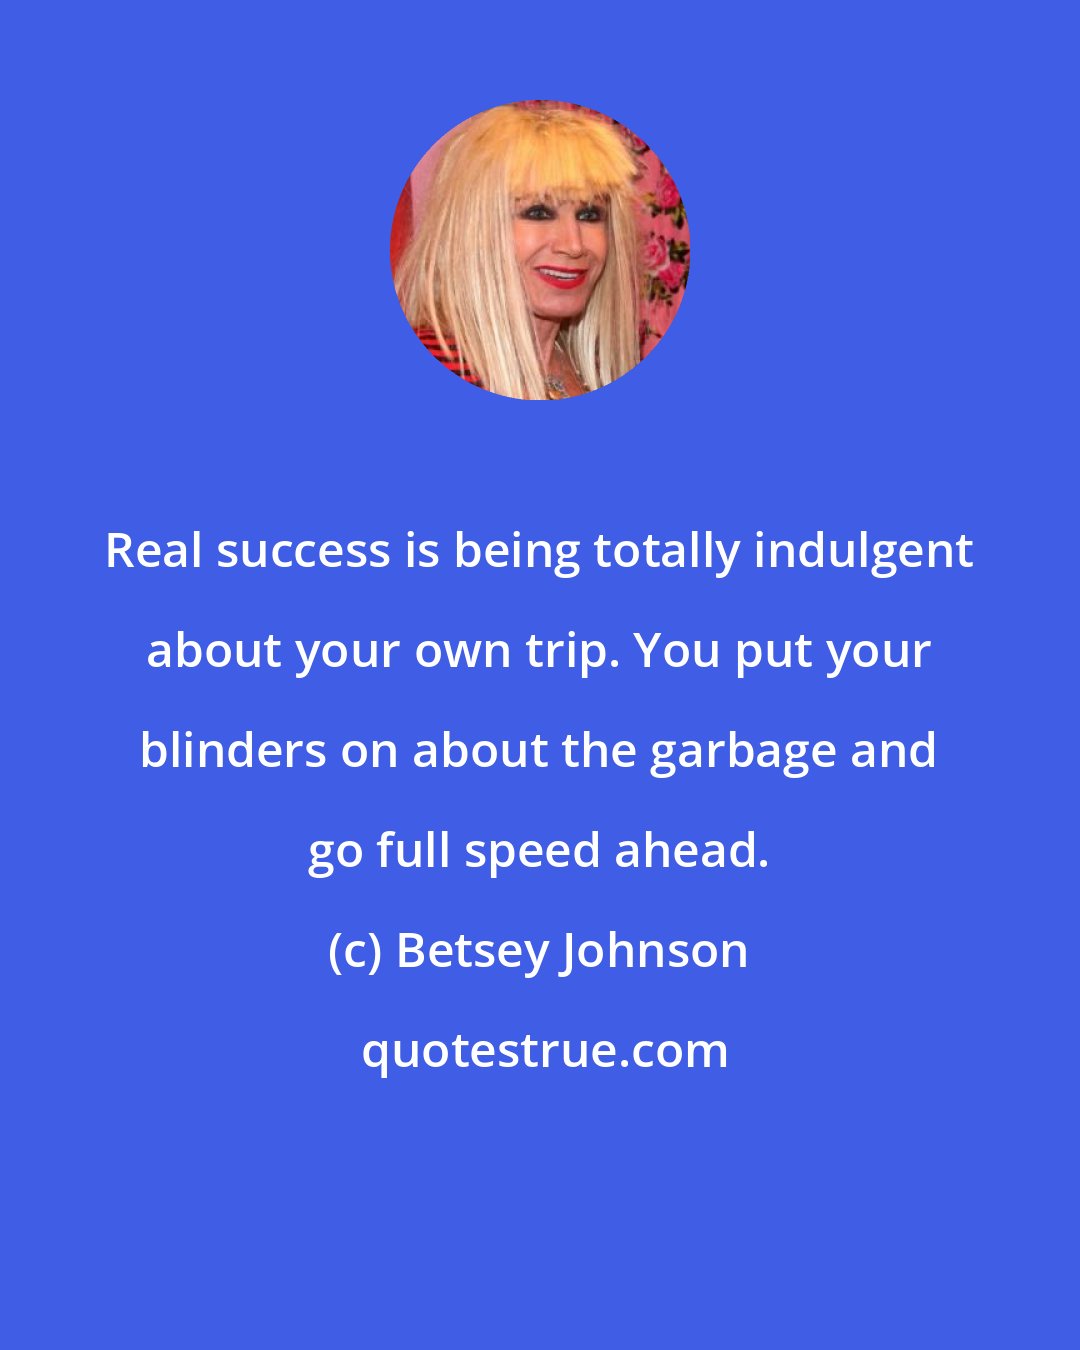 Betsey Johnson: Real success is being totally indulgent about your own trip. You put your blinders on about the garbage and go full speed ahead.